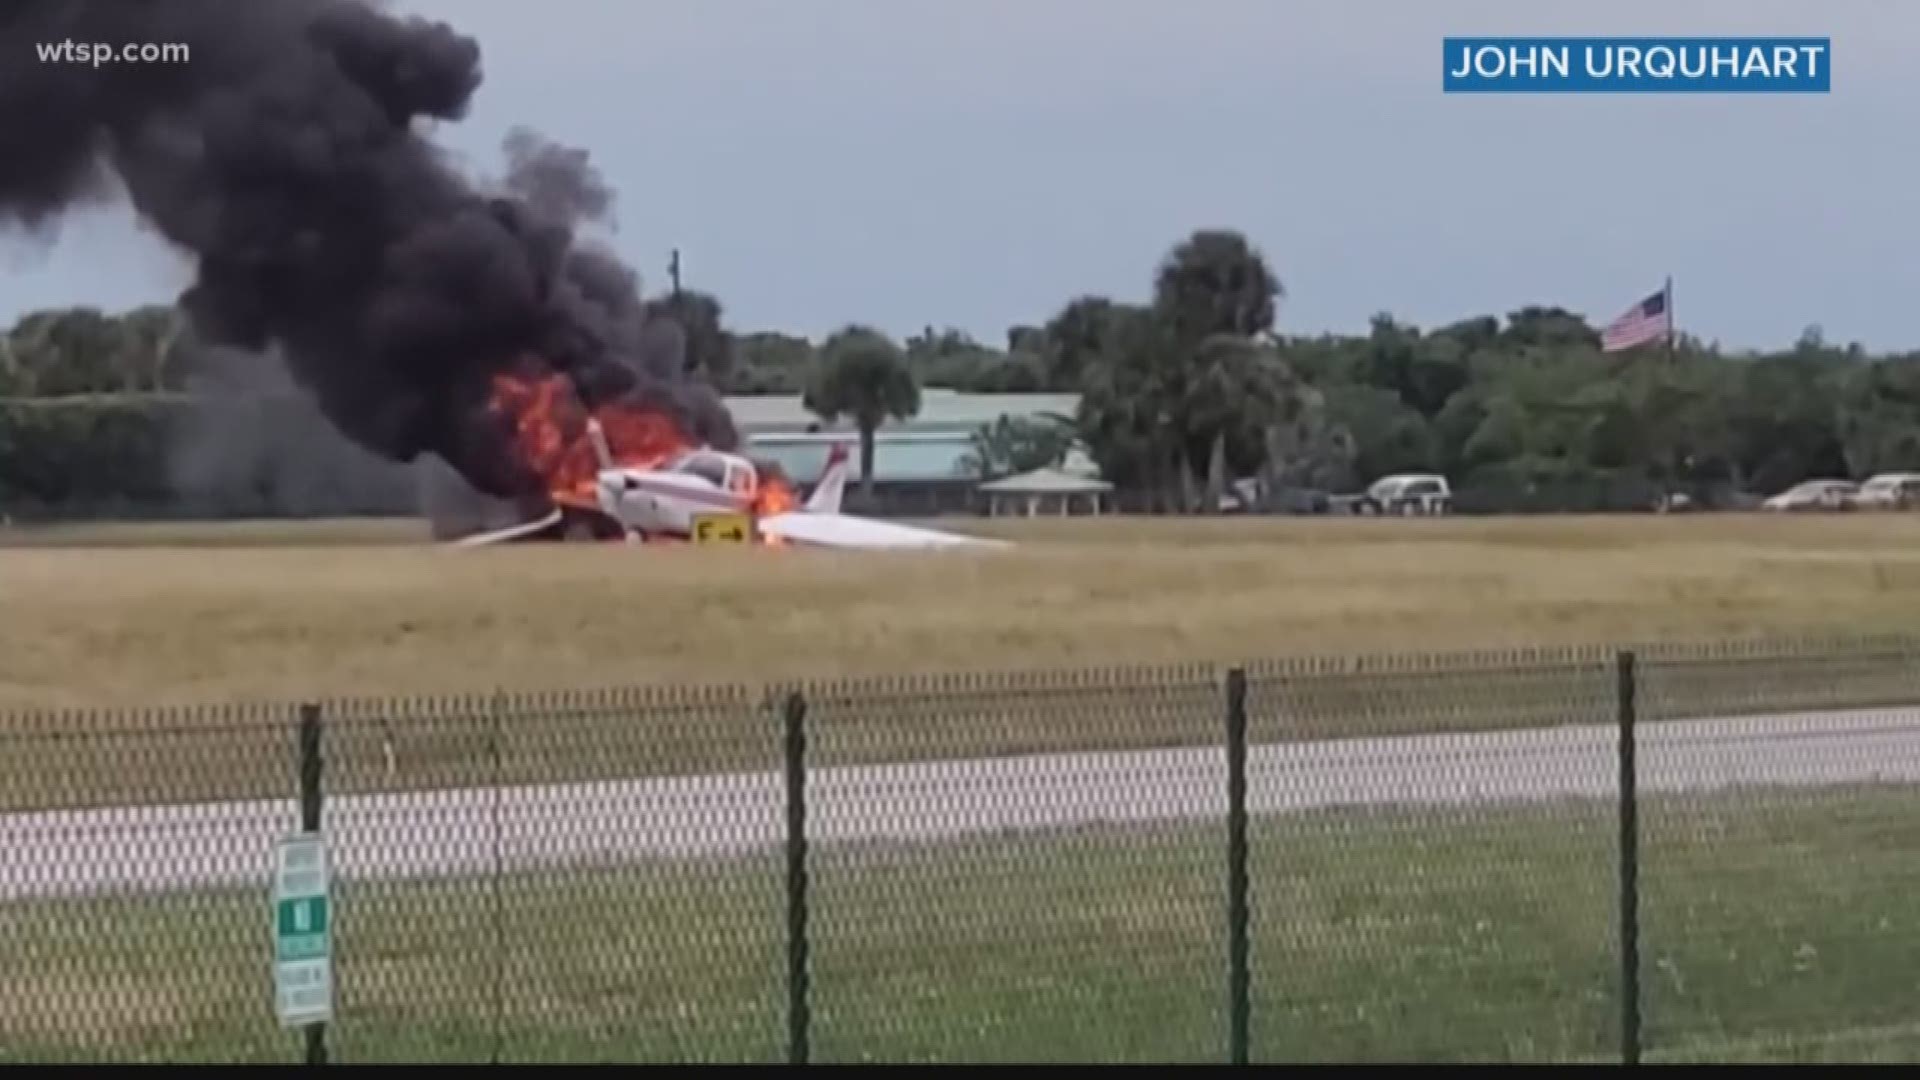 Two men were able to escape their plane after it caught fire at Venice Municipal Airport, prompting operations there to be suspended.